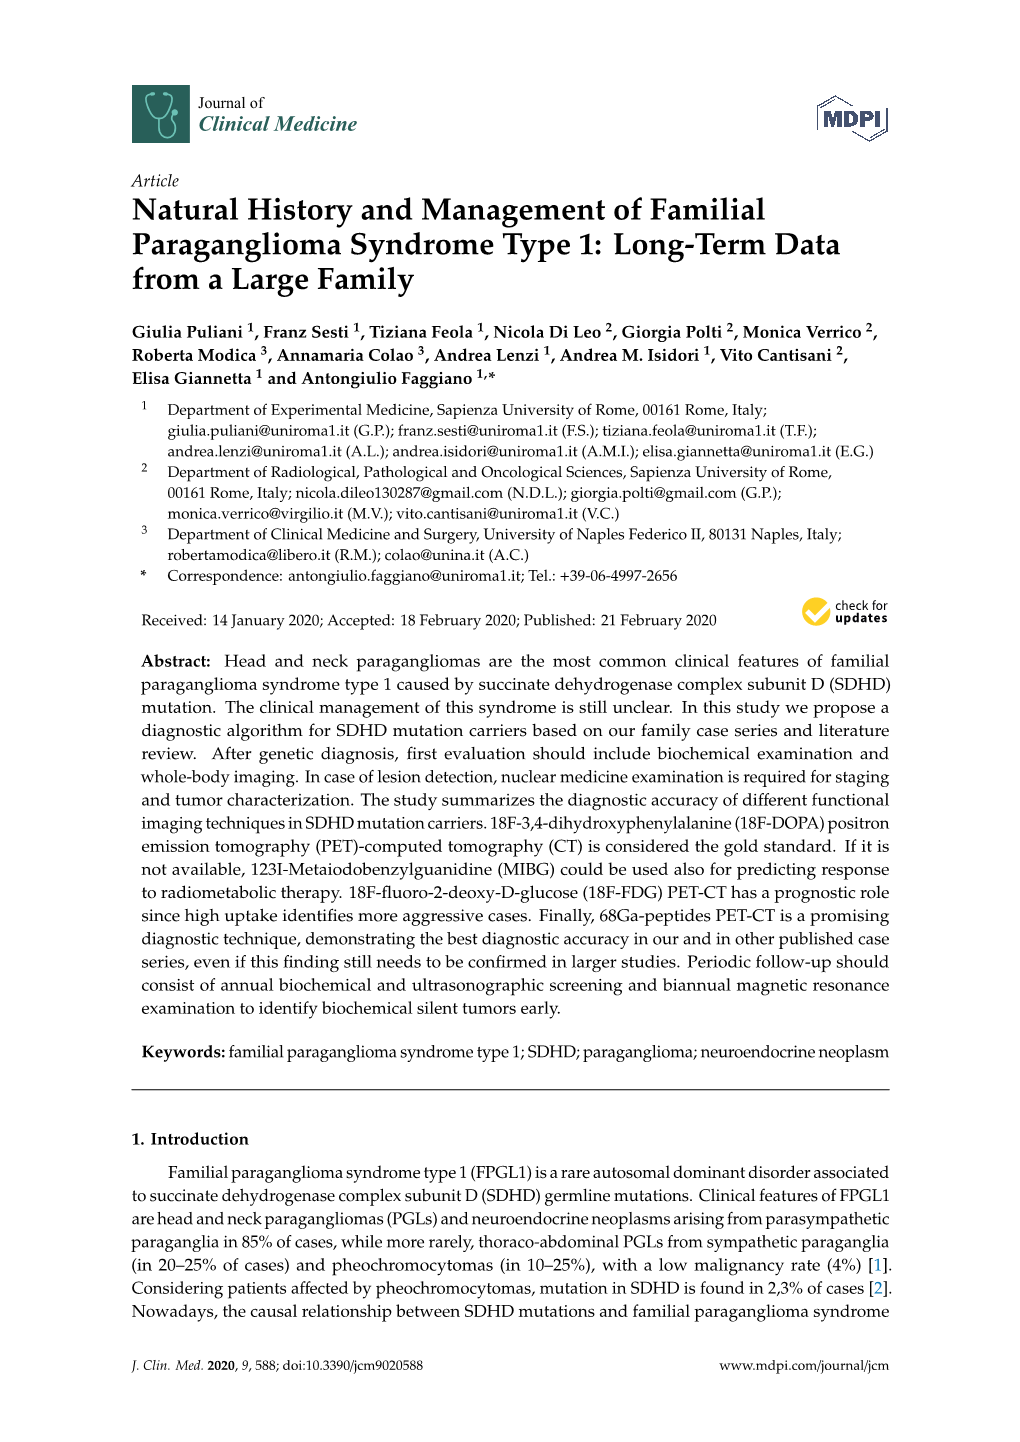 Natural History and Management of Familial Paraganglioma Syndrome Type 1: Long-Term Data from a Large Family